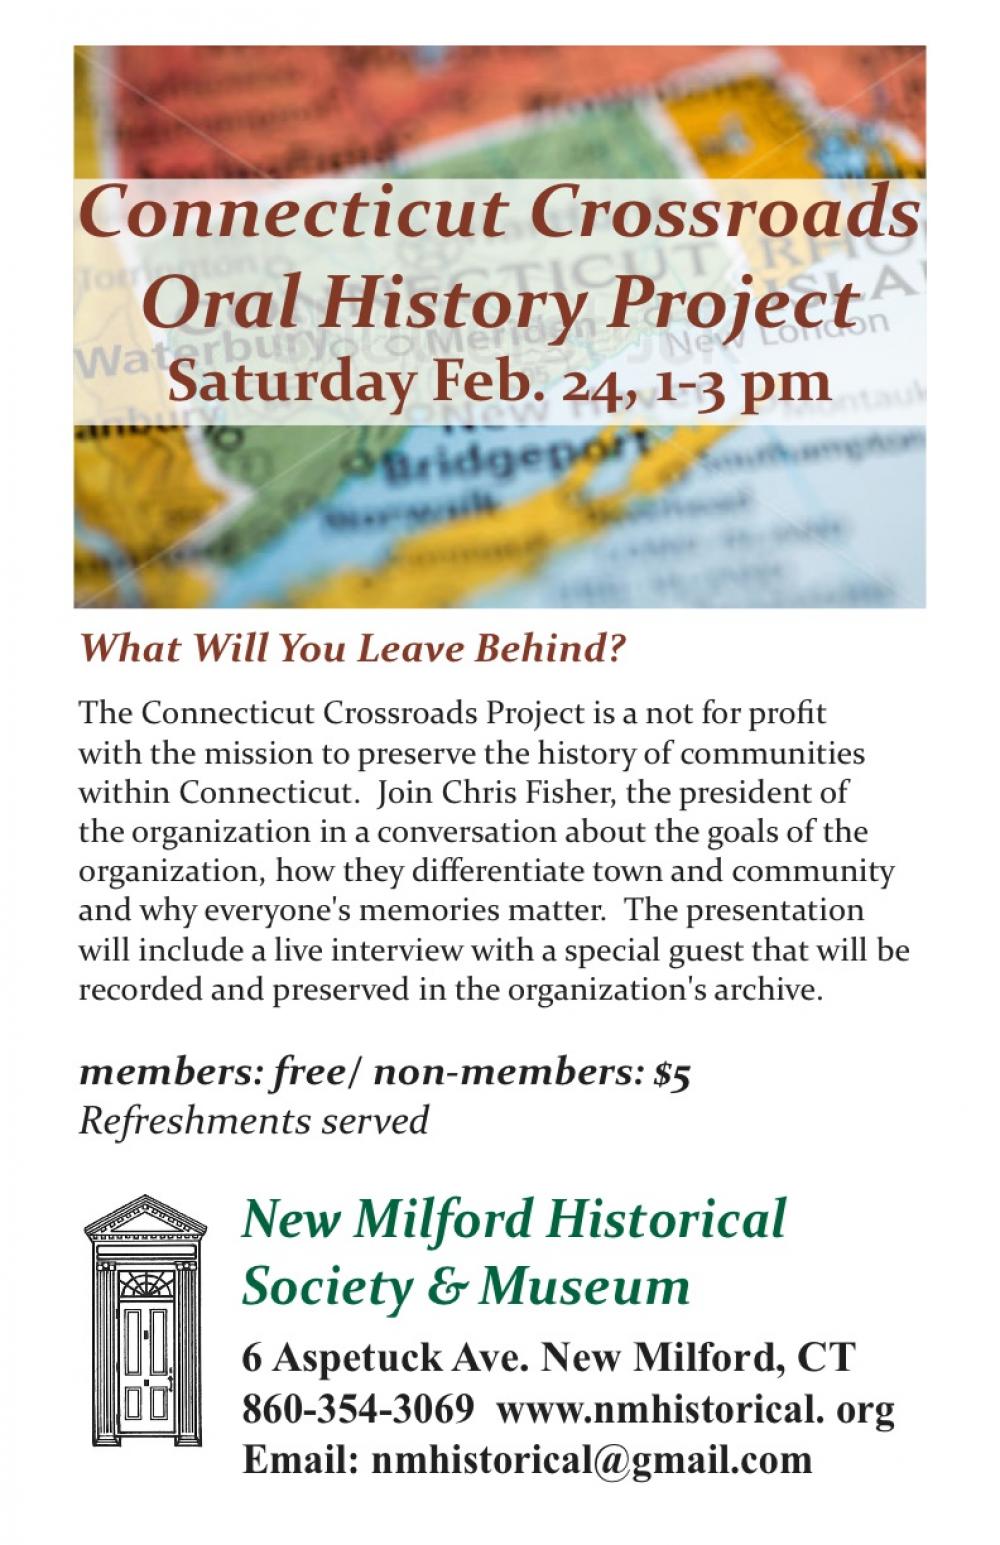 What Will You Leave Behind? 
The Connecticut Crossroads Project is a not for profit 
with the mission to preserve the history of communities 
within Connecticut.  Join Chris Fisher, the president of 
the organization in a conversation about the goals of the 
organization, how they differentiate town and community 
and why everyone's memories matter.  The presentation 
will include a live interview with a special guest that will be 
recorded and preserved in the organization's archive. 
members: free/ non-members: $5 
Refreshments served